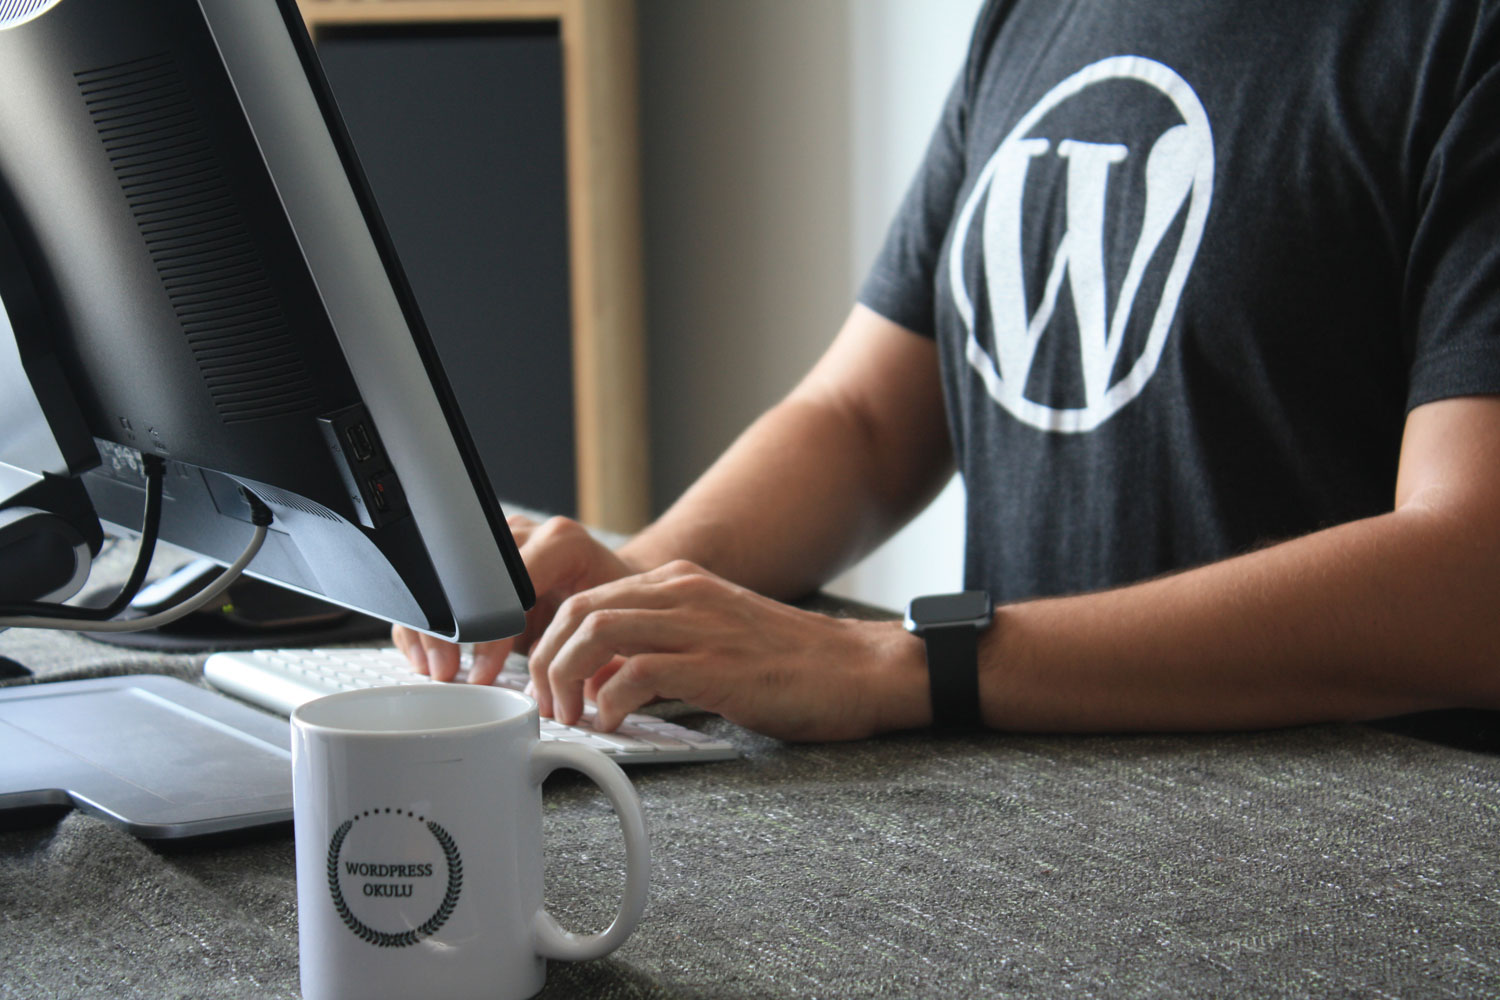 The future of WordPress: What’s next for the platform and how to stay ahead of the curve